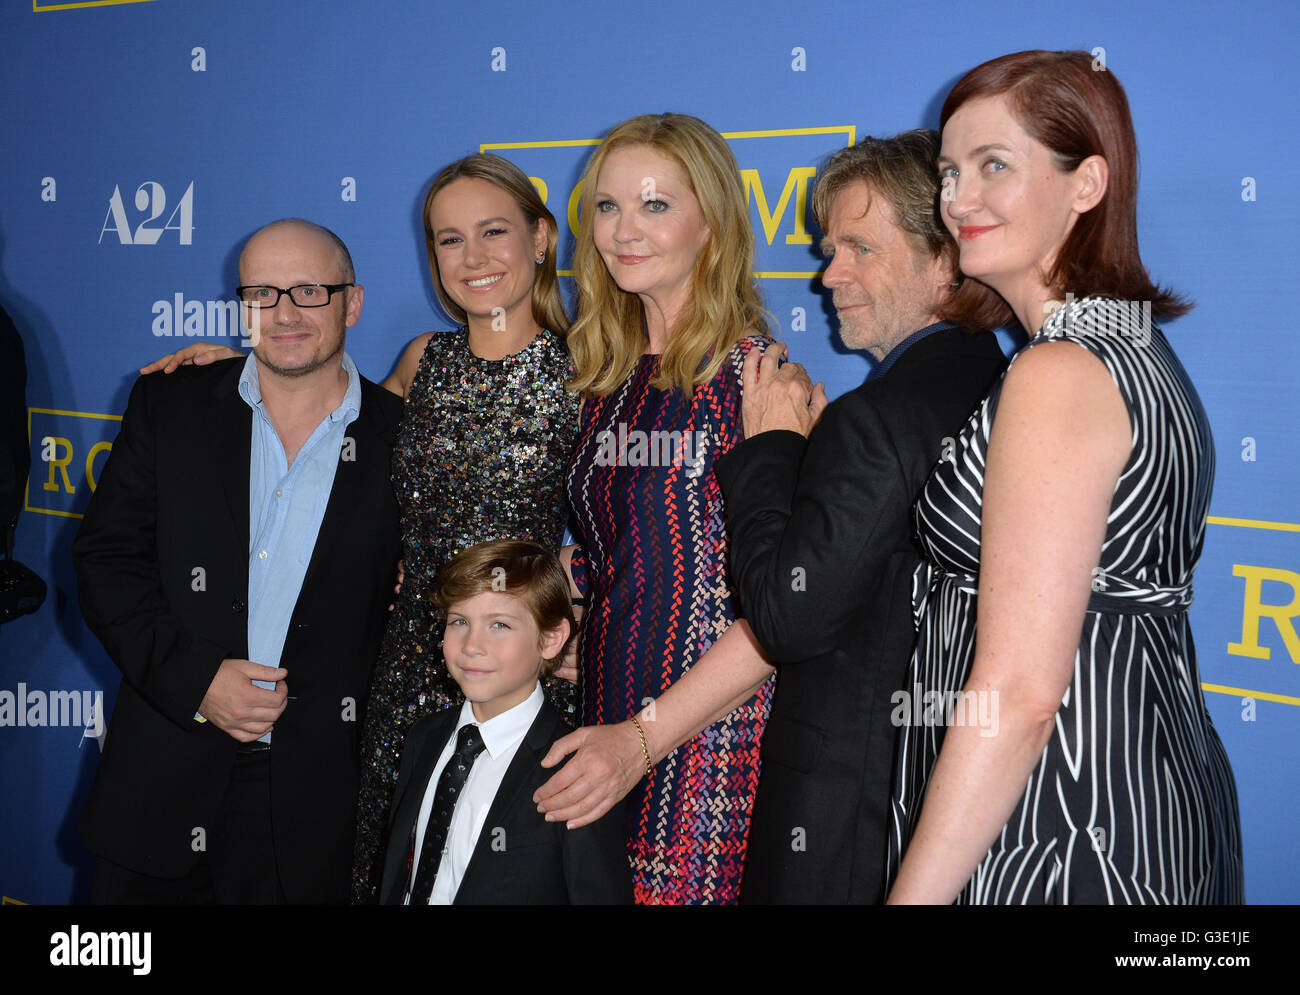 LOS ANGELES, CA - OCTOBER 13, 2015: Actors William H. Macy, Brie Larson, Joan Allen & Jacob Tremblay & director Lenny Abrahmson & screenwriter Emma Donogue at the Los Angeles premiere of their movie 'Room' at the Pacific Design Centre, West Hollywood. Stock Photo